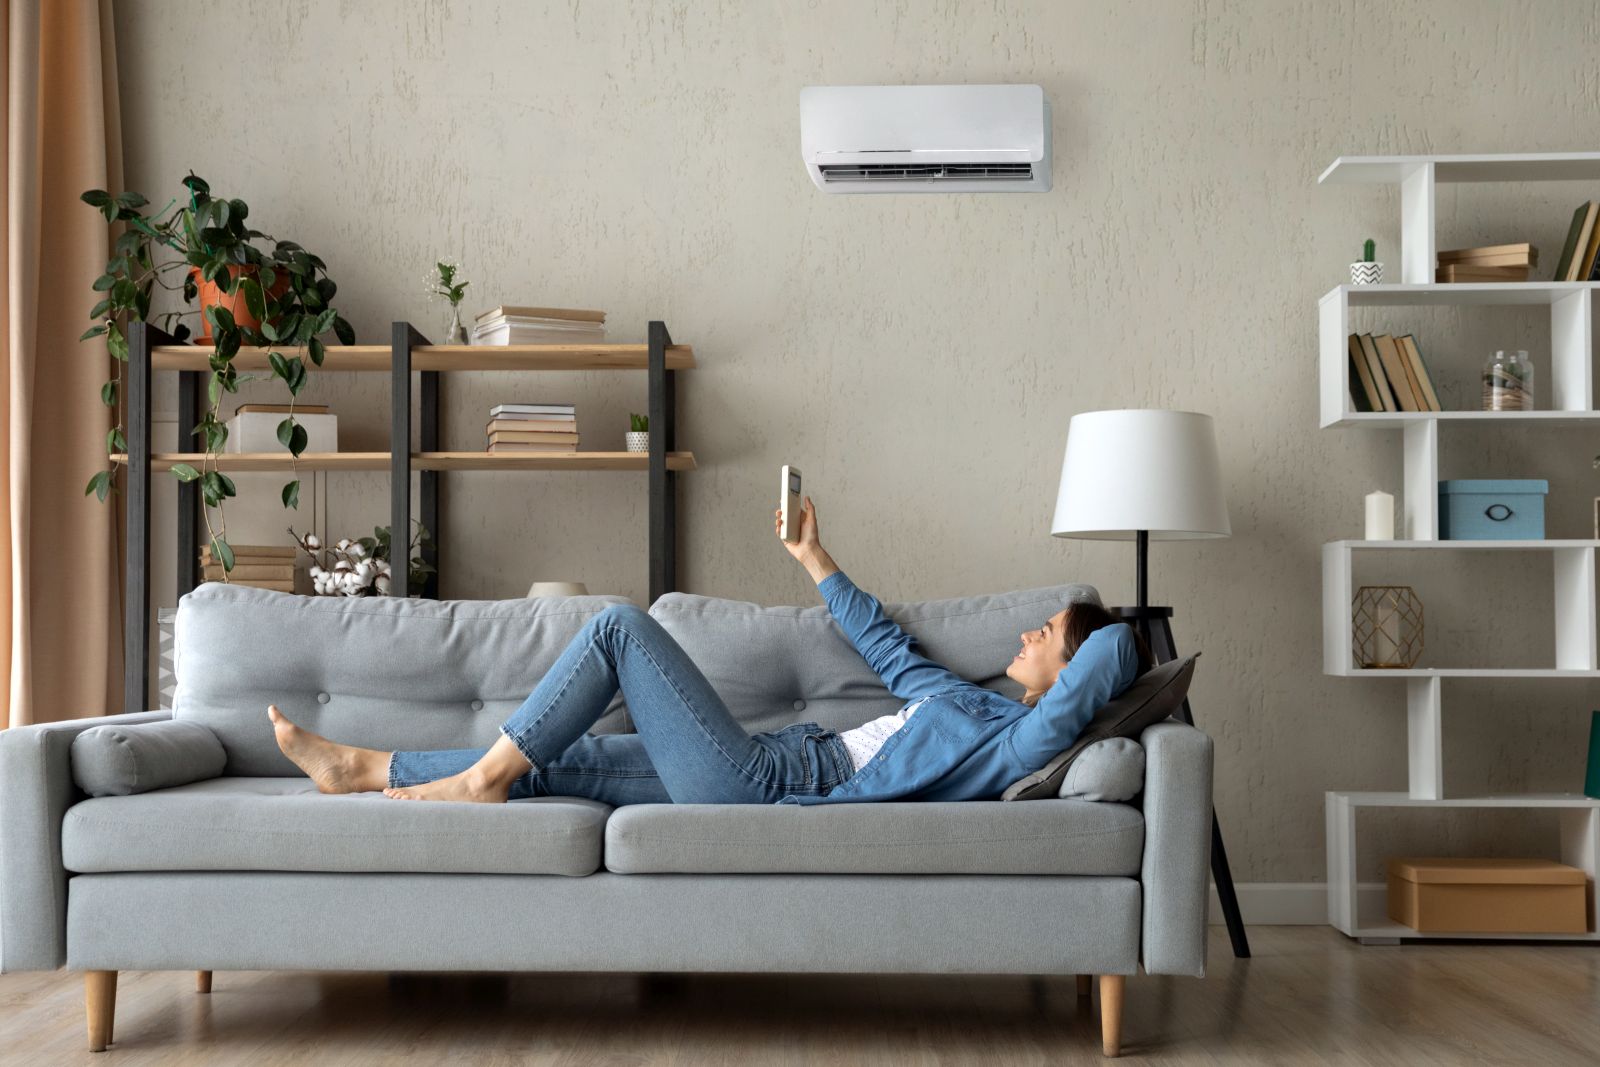 Woman using a remote control to operate domestic air conditioning unit while relaxing on a sofa